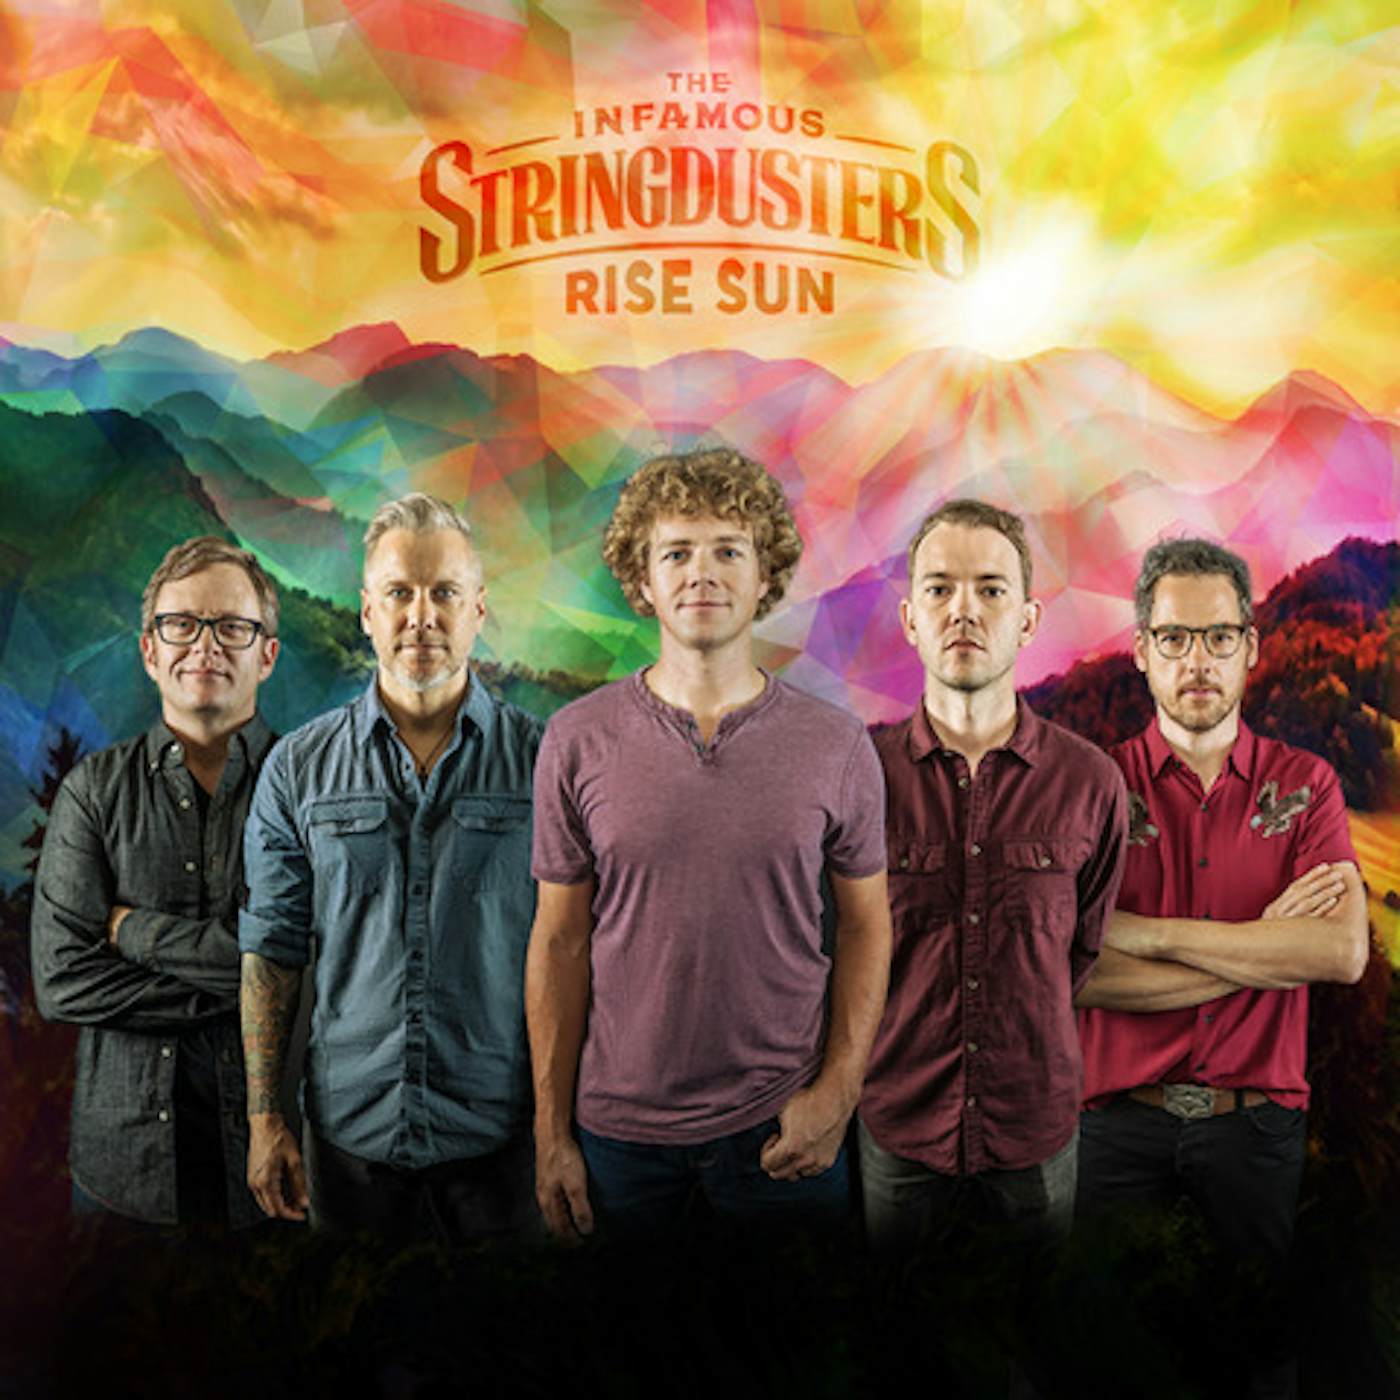 The Infamous Stringdusters RISE SUN CD